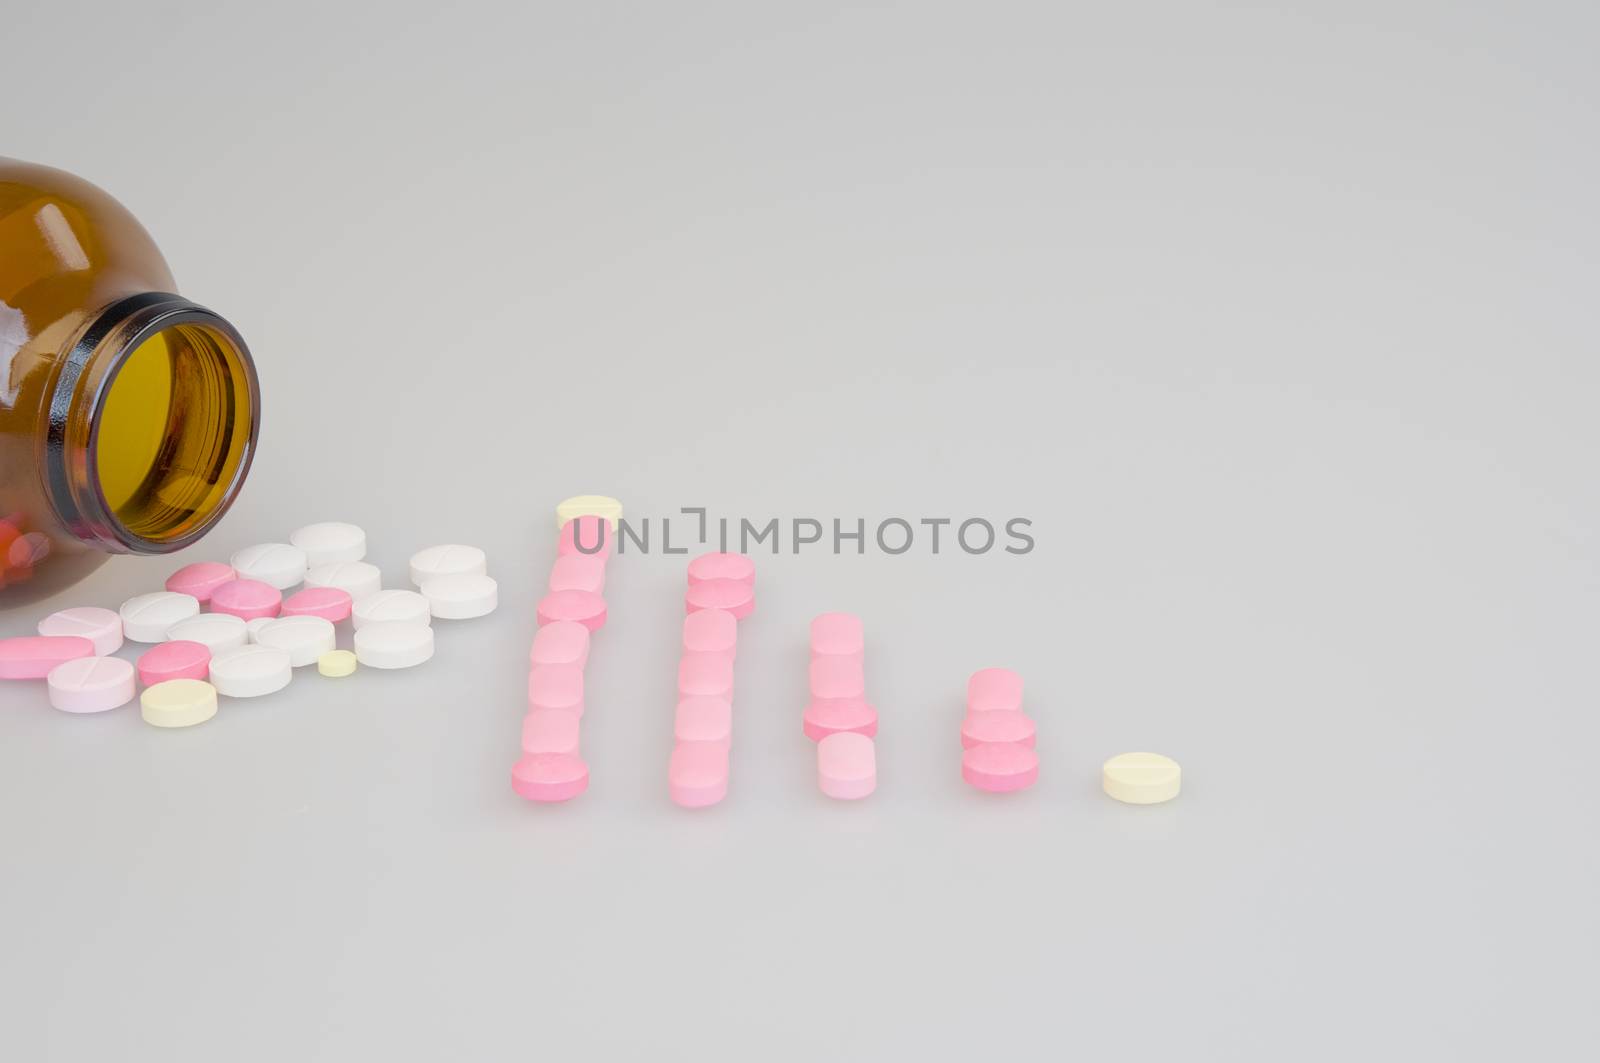 Colorful tablets place as bar graph and brown bottle with white background.